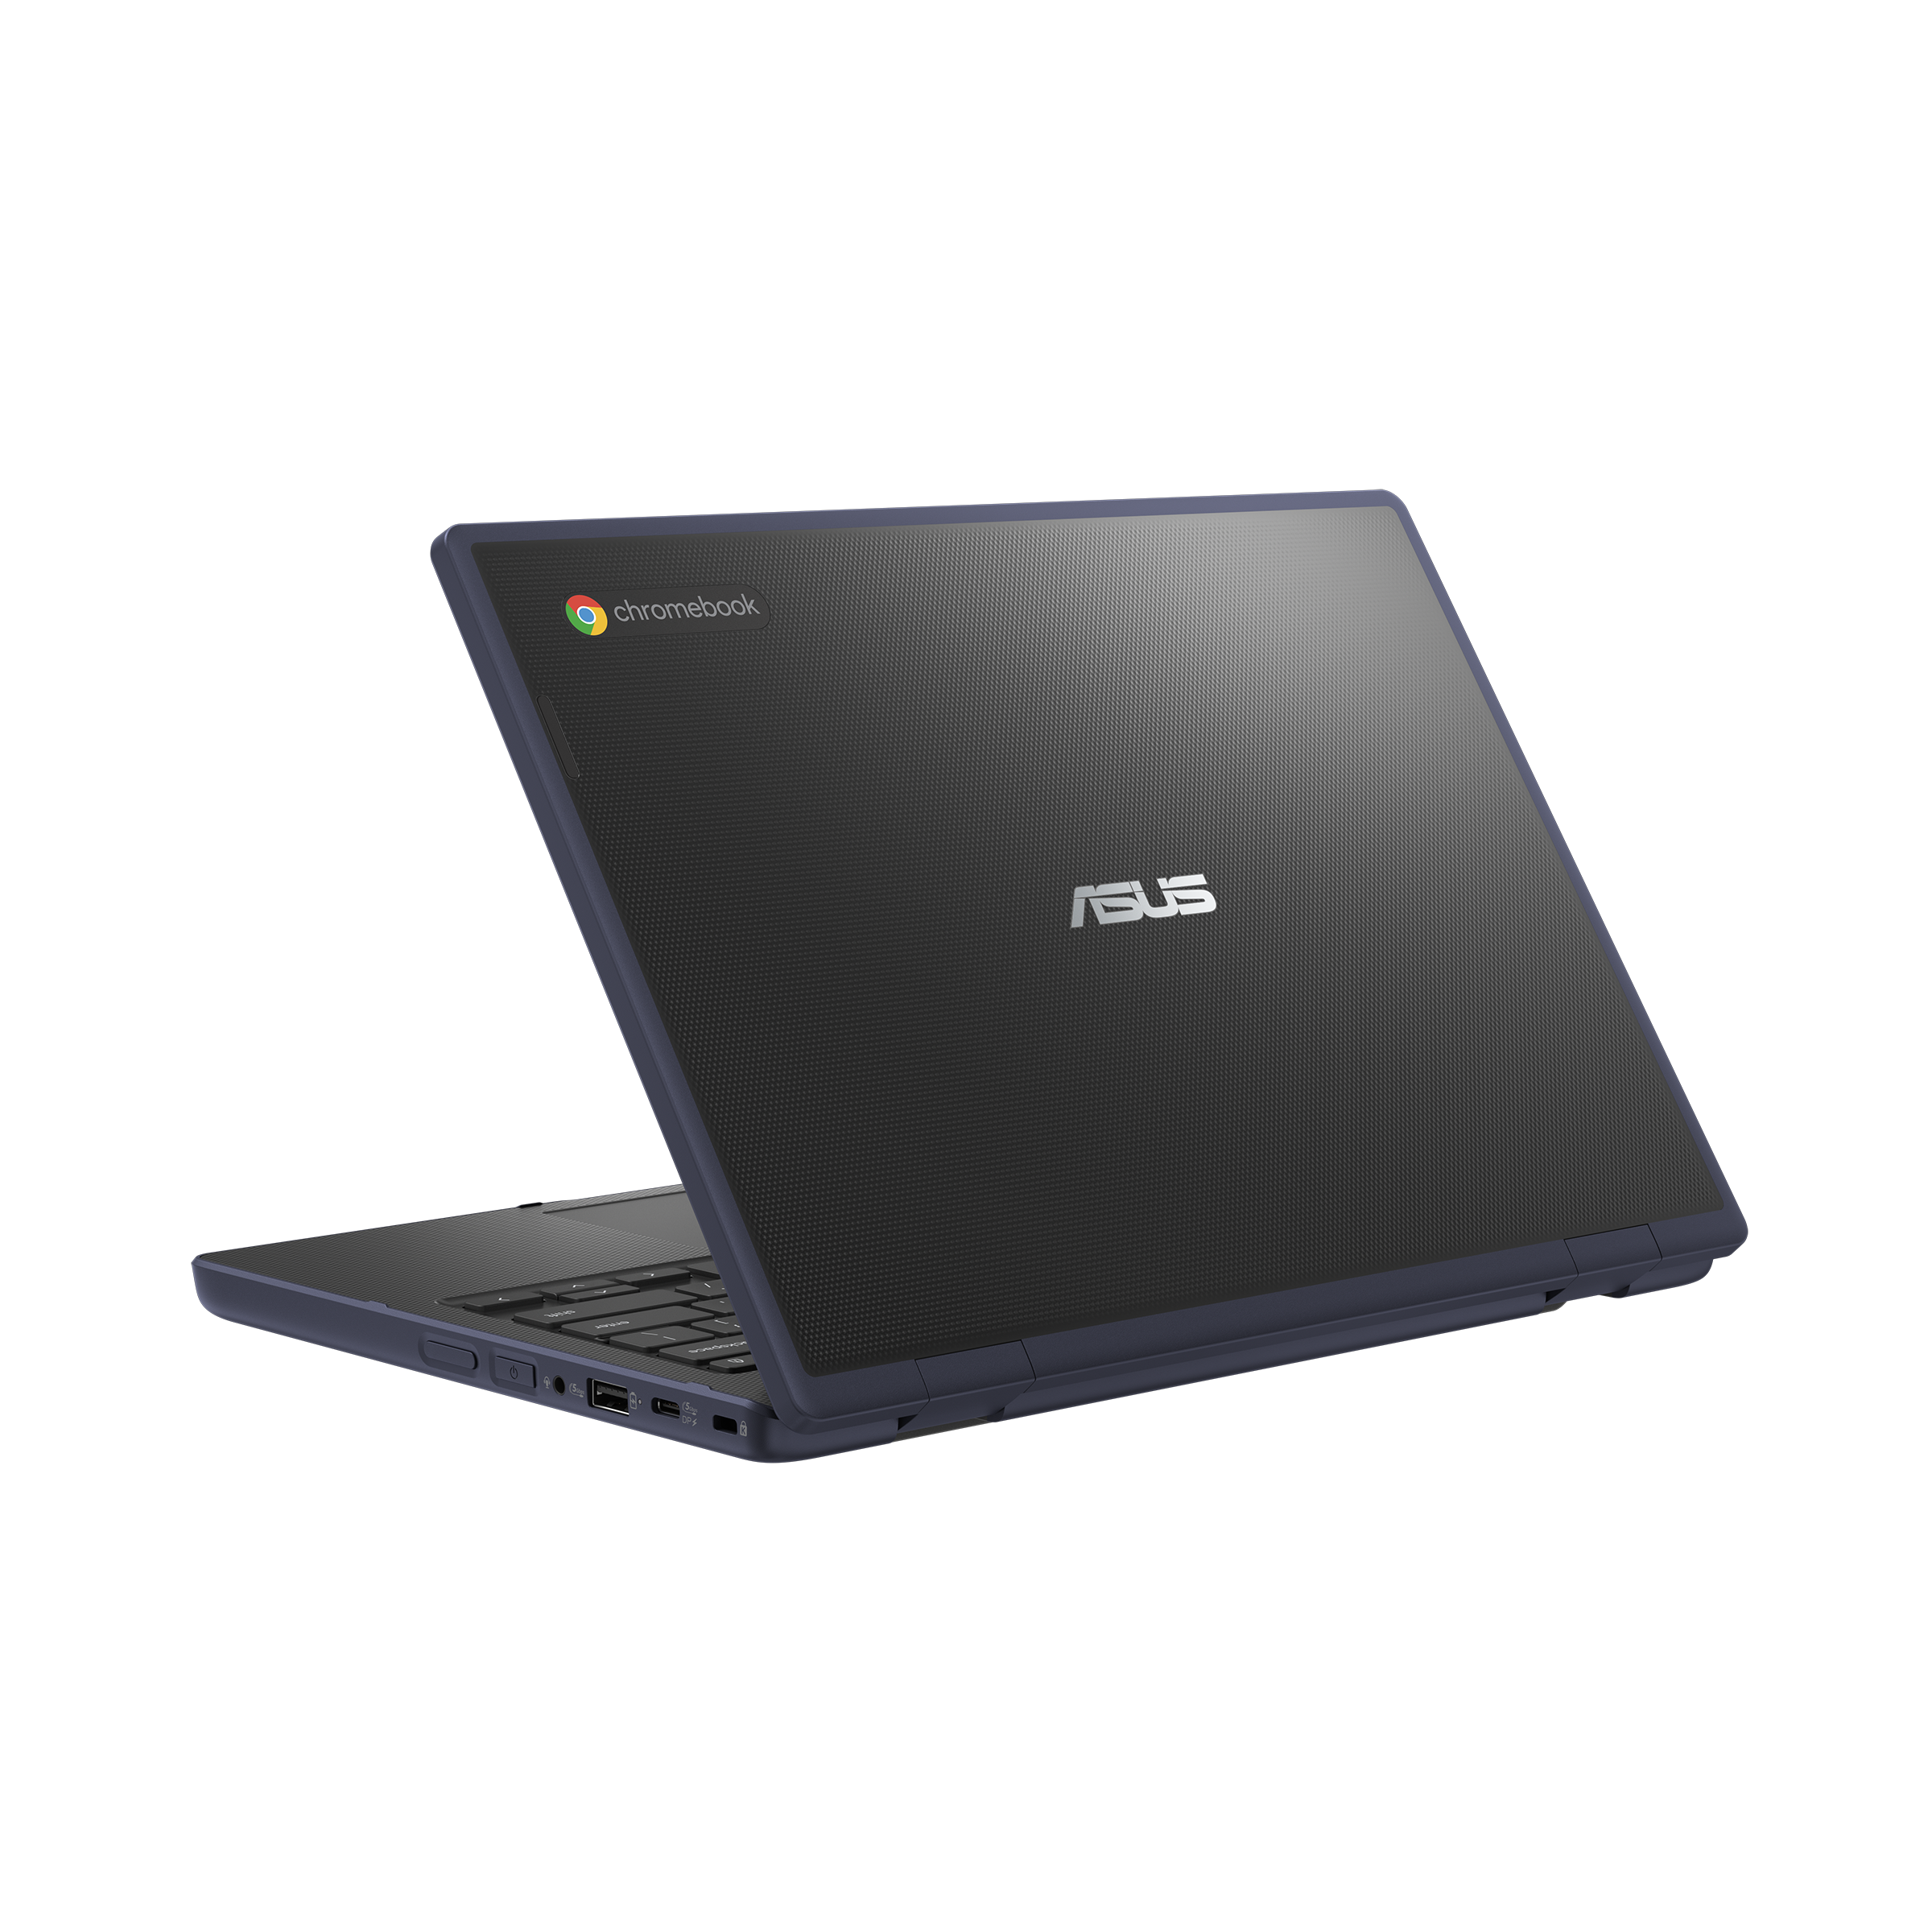 ASUS Chromebook CR11 (CR1102C)｜Laptops For Students｜ASUS Global